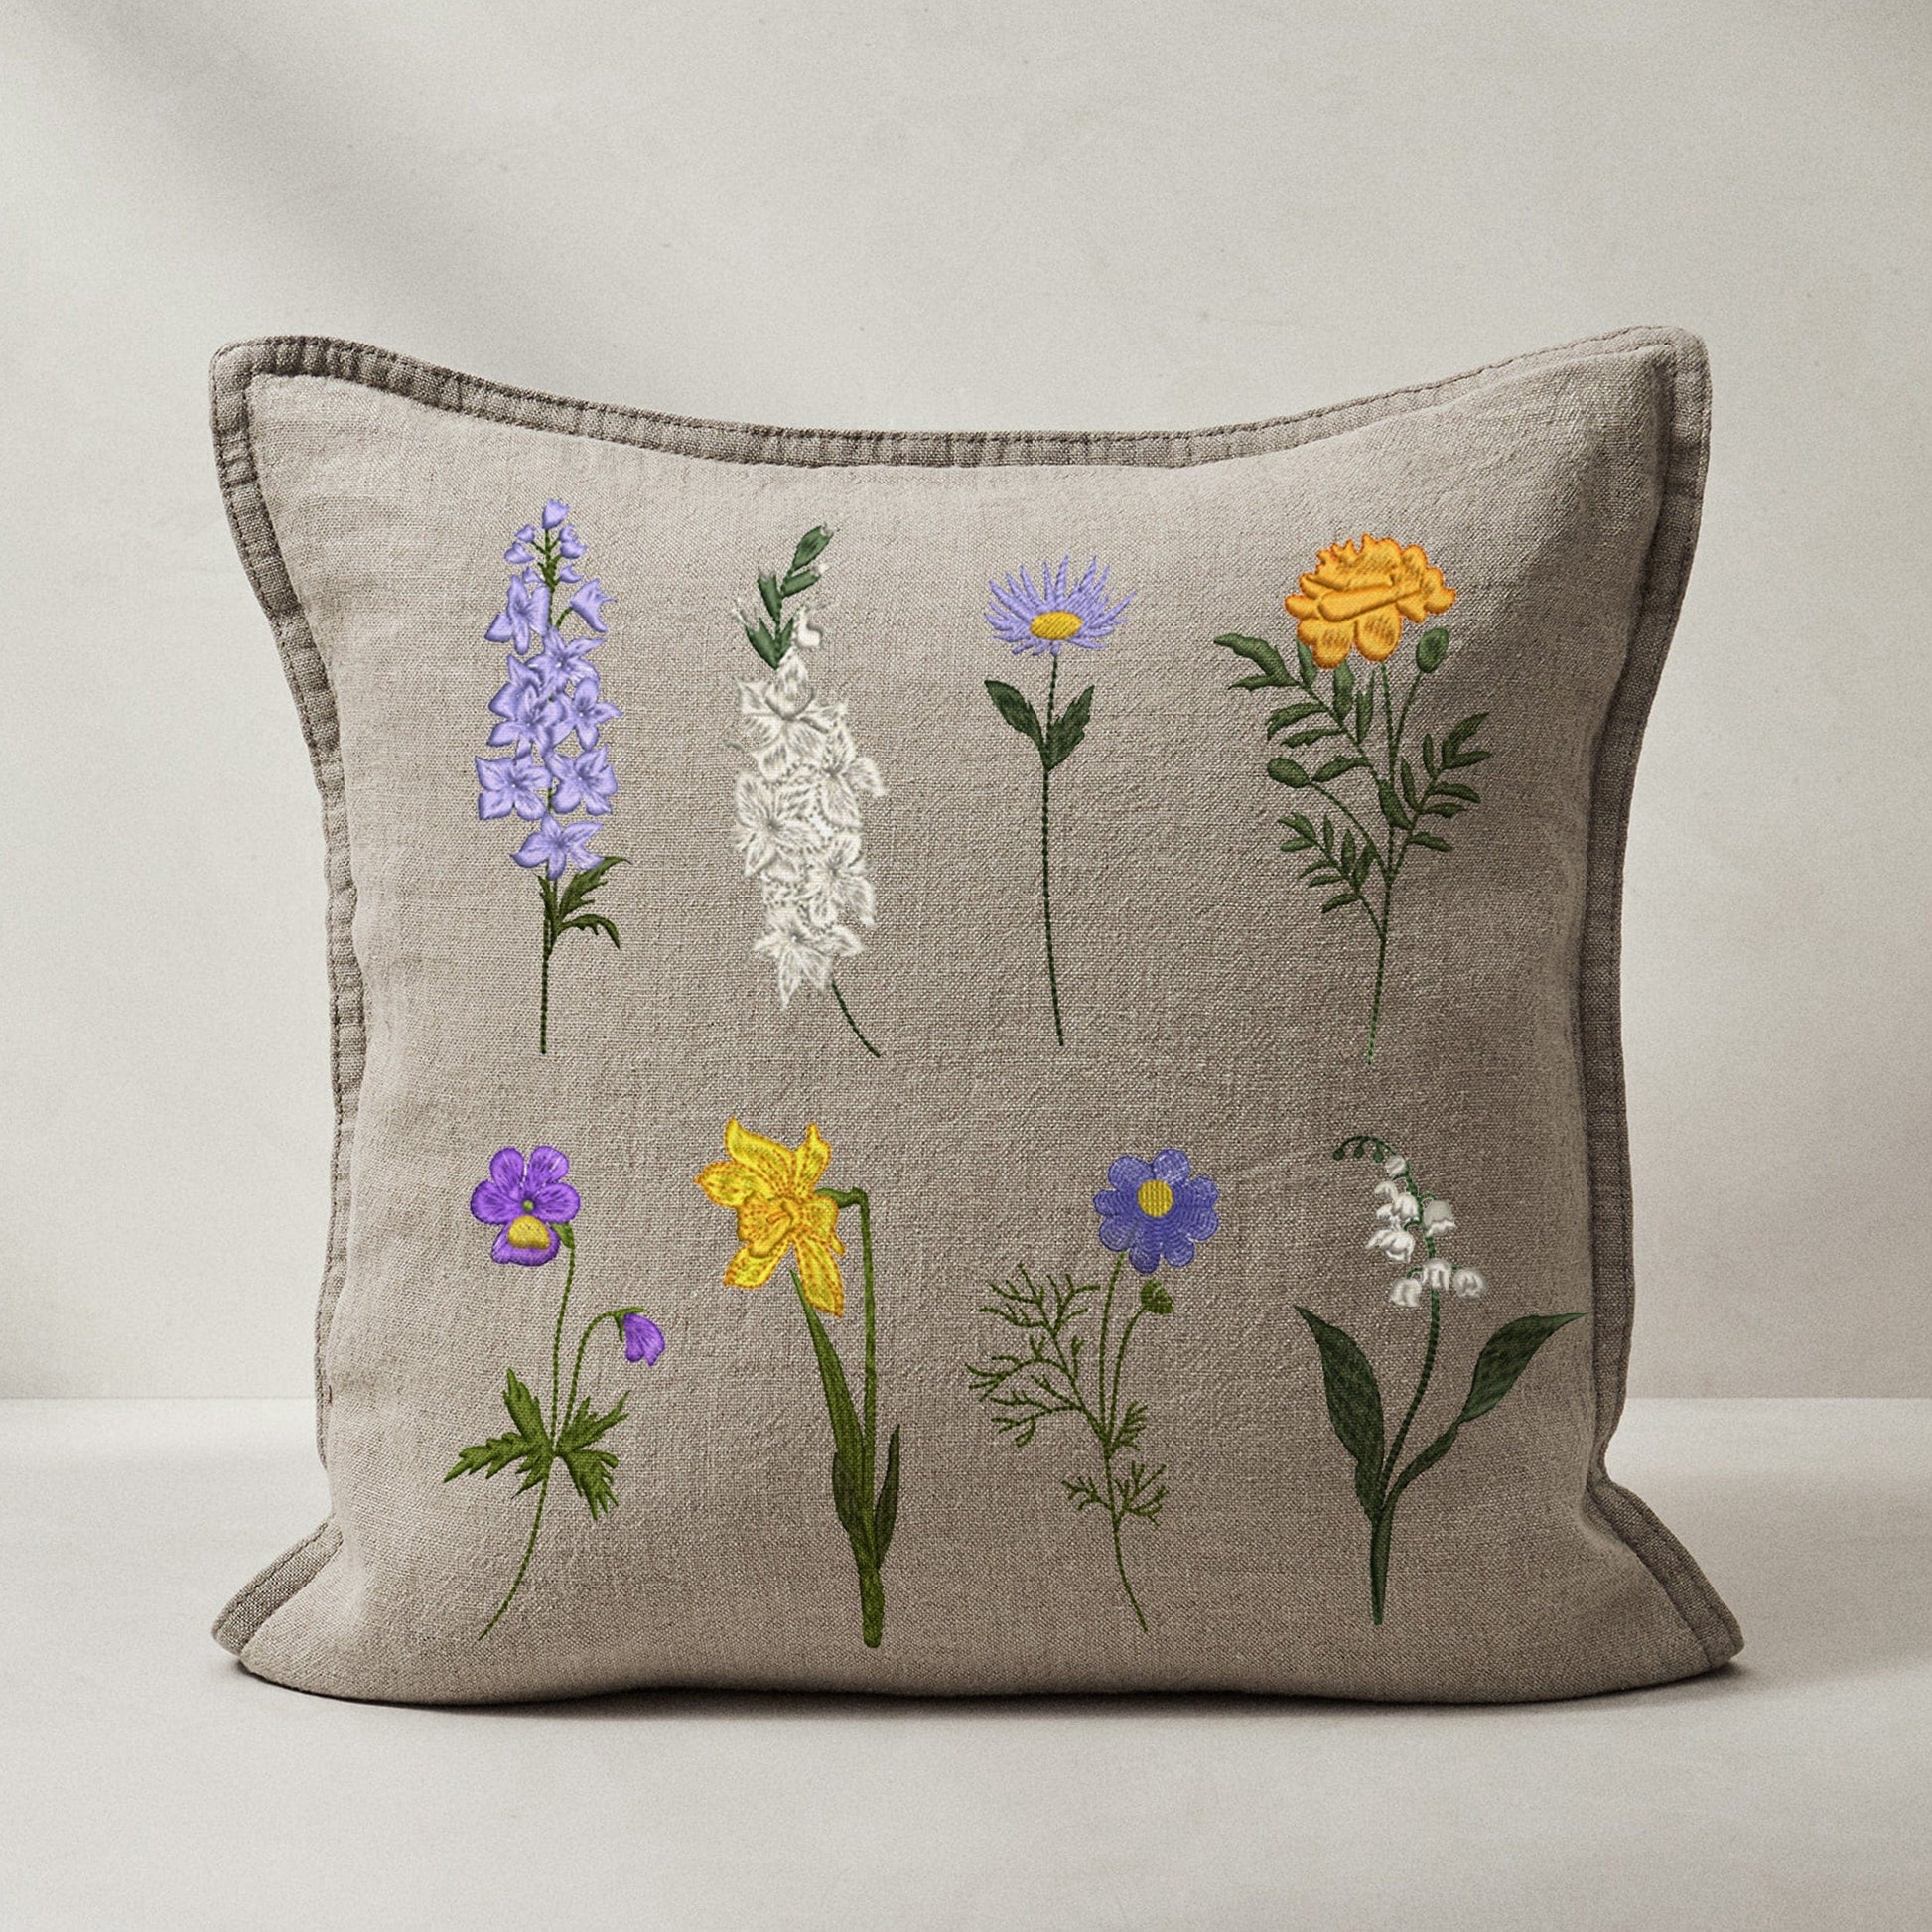 Beautiful wildflower machine embroidery design on pillow